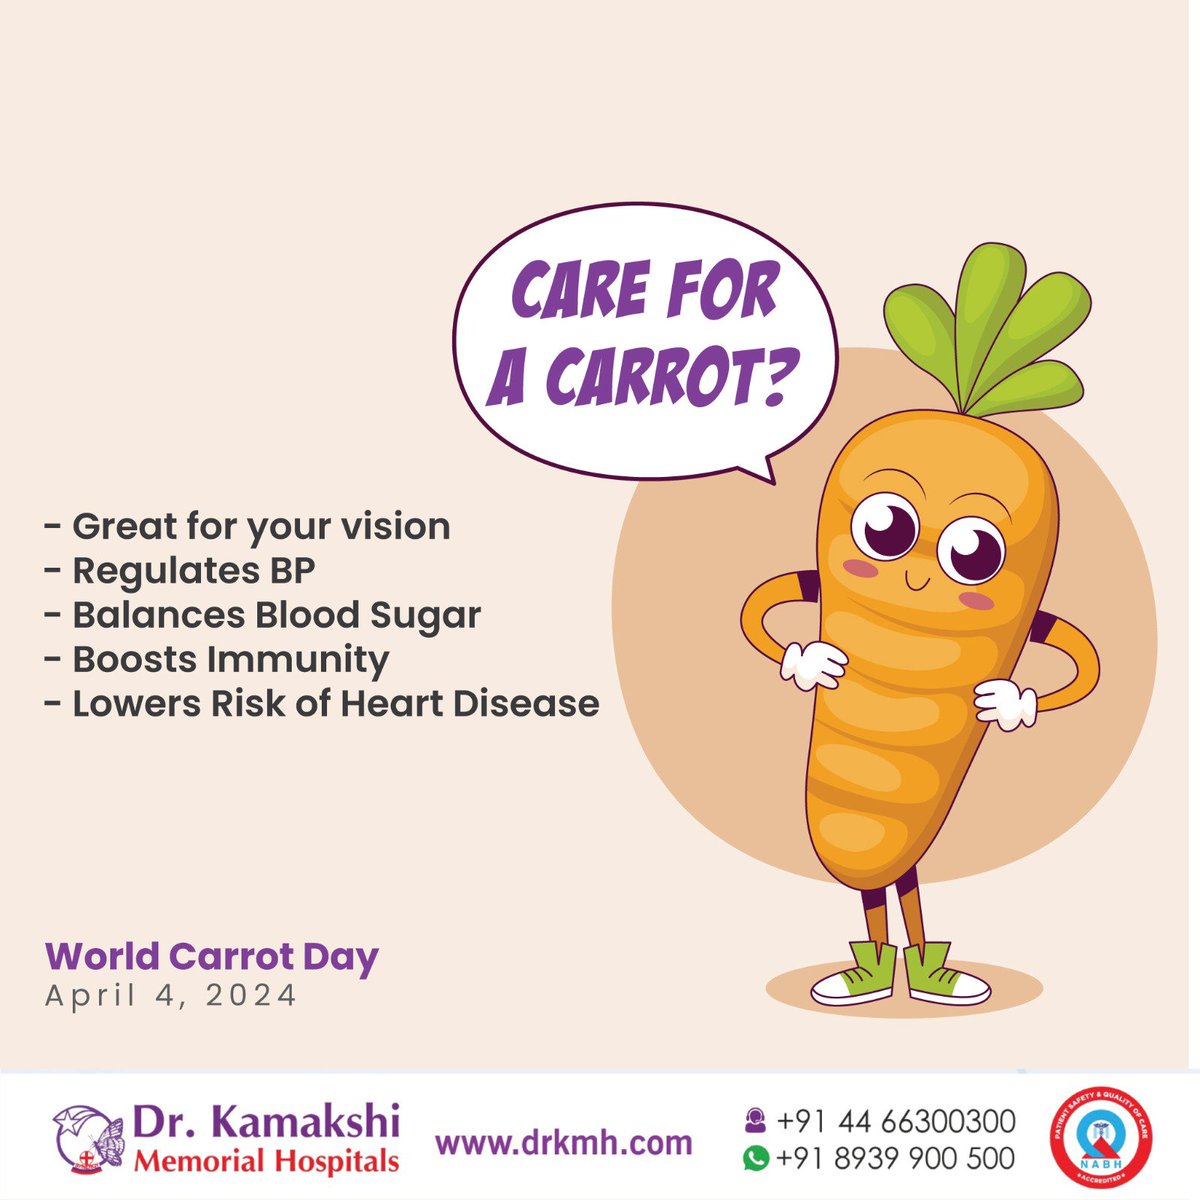 World Carrot Day - April 4
Crunchy carrots are a nutritional powerhouse! They're loaded with vitamin A, fibre & antioxidants. So munch on some carrots to boost your vision, immunity, and overall health!
#worldcarrotday #healthyfood #hospital  #multispecialityhospital #chennai